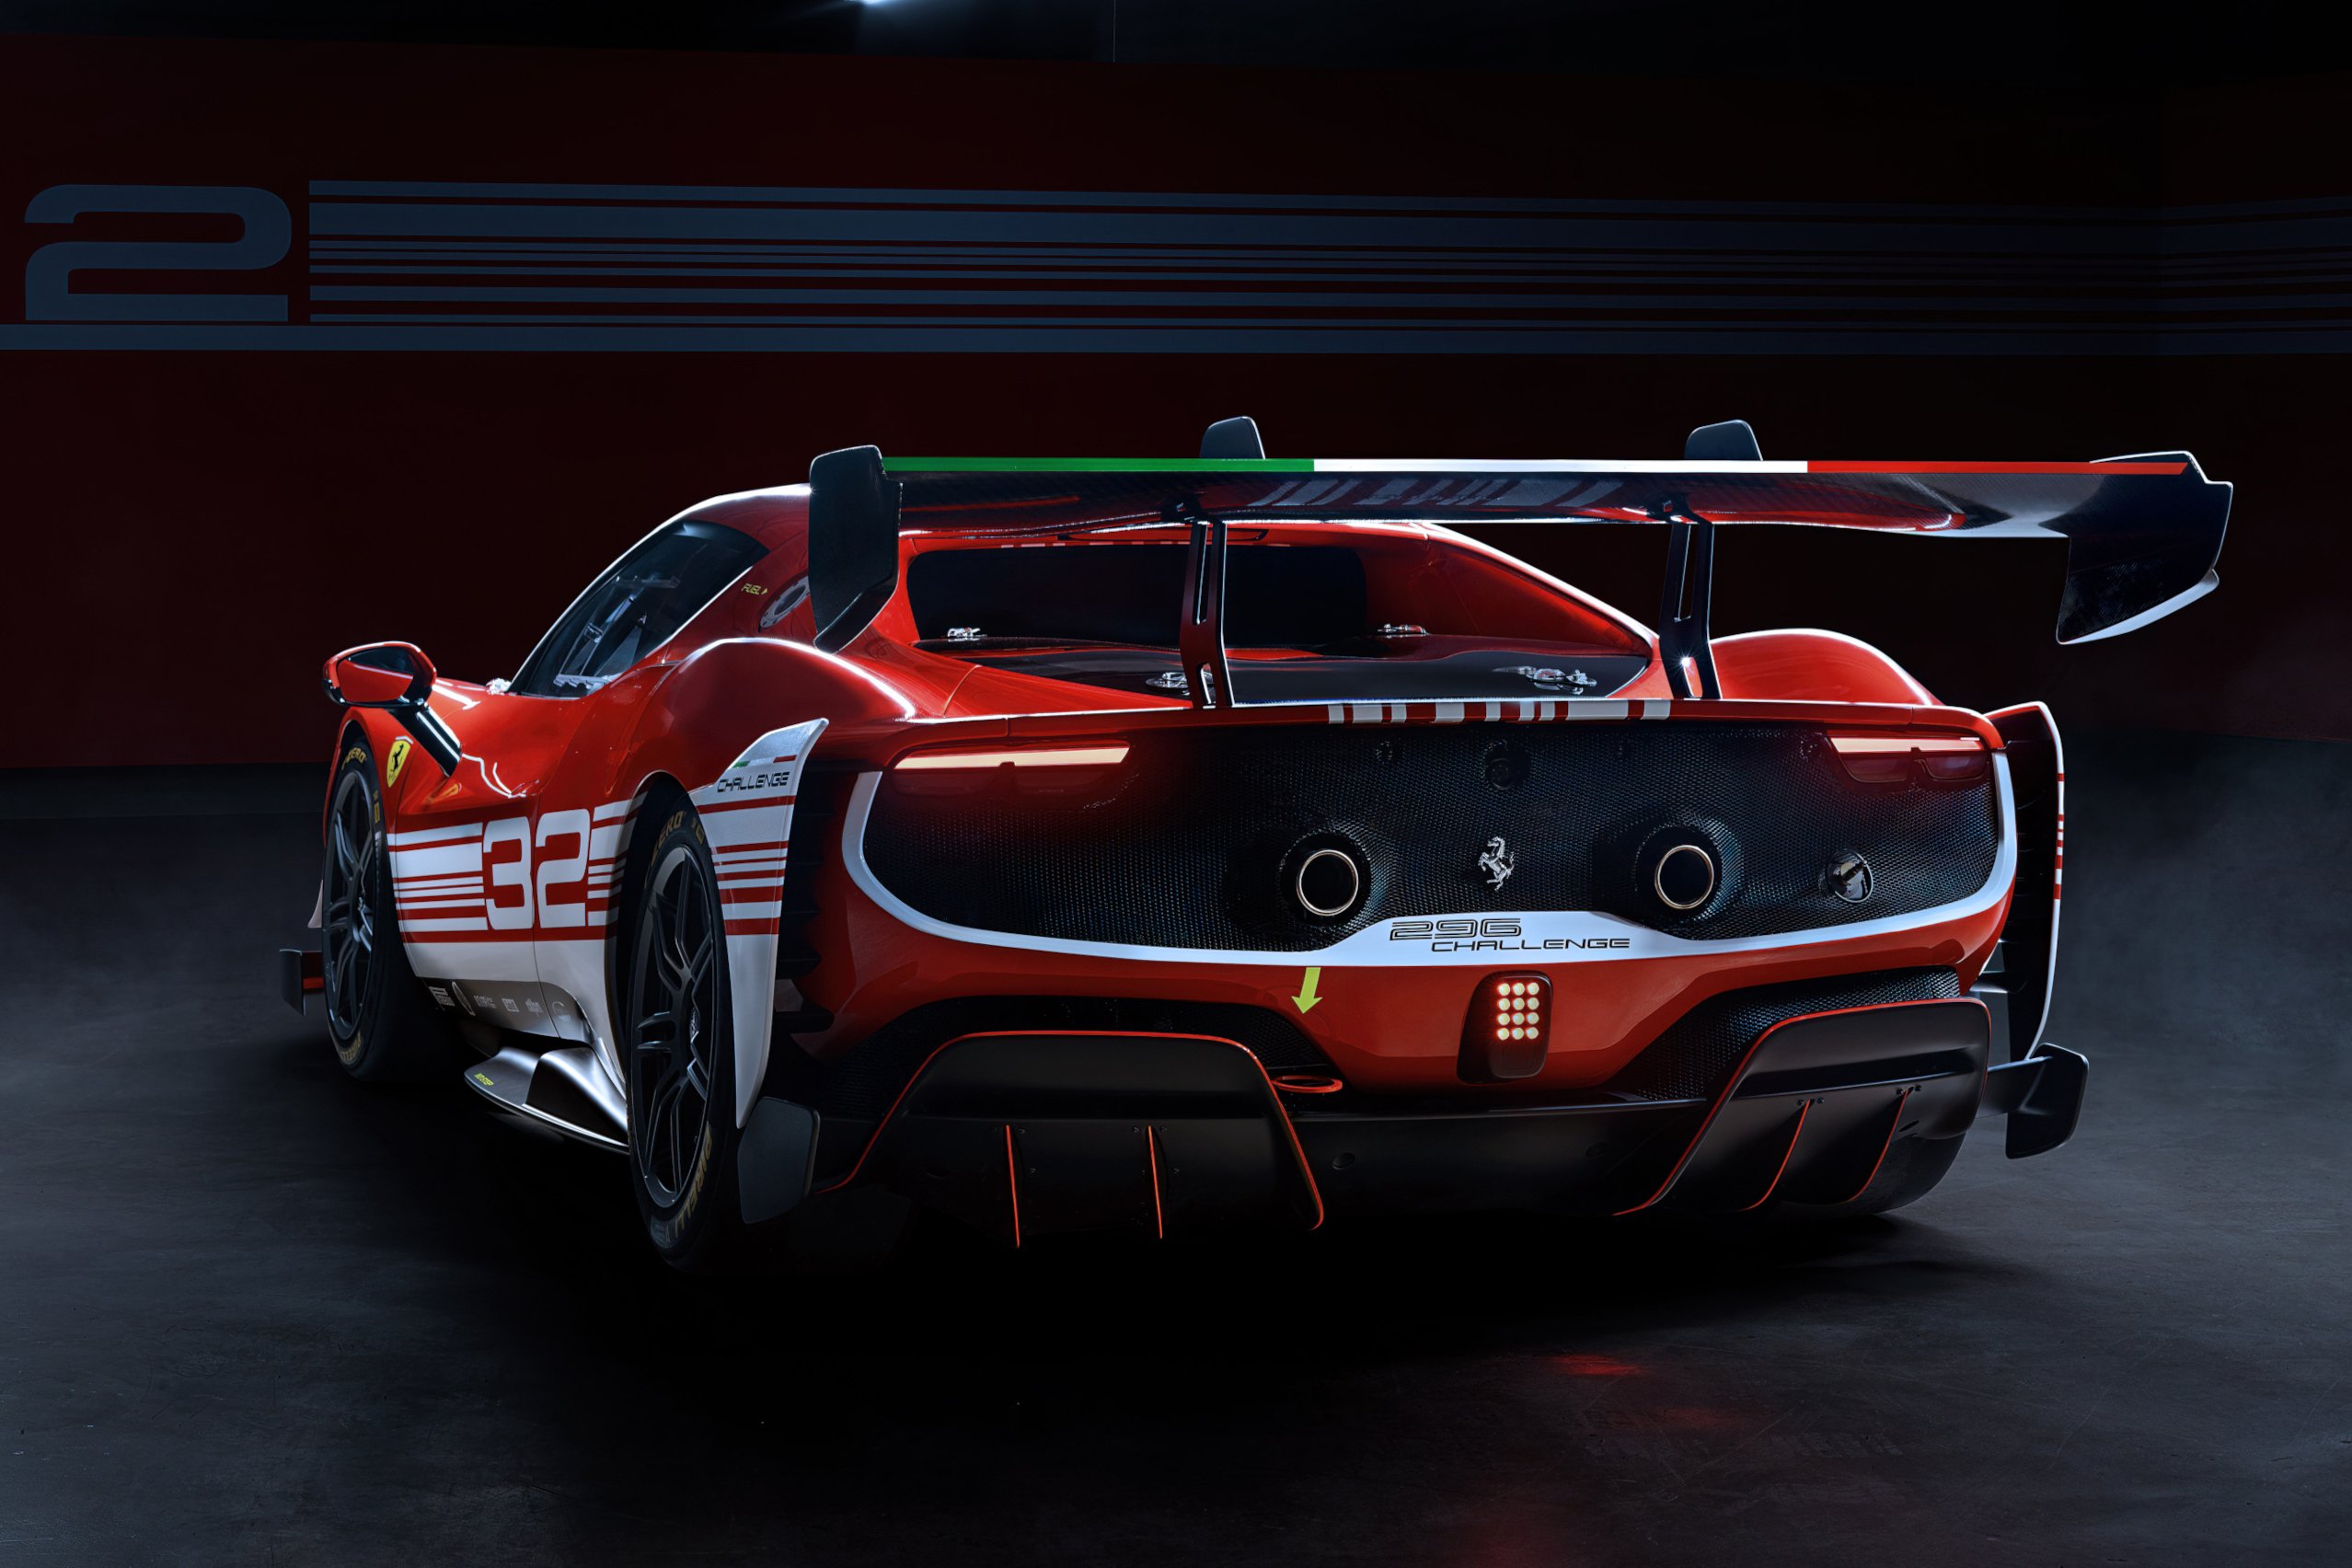 The new Ferrari 3 racing car storms the scene with a world record